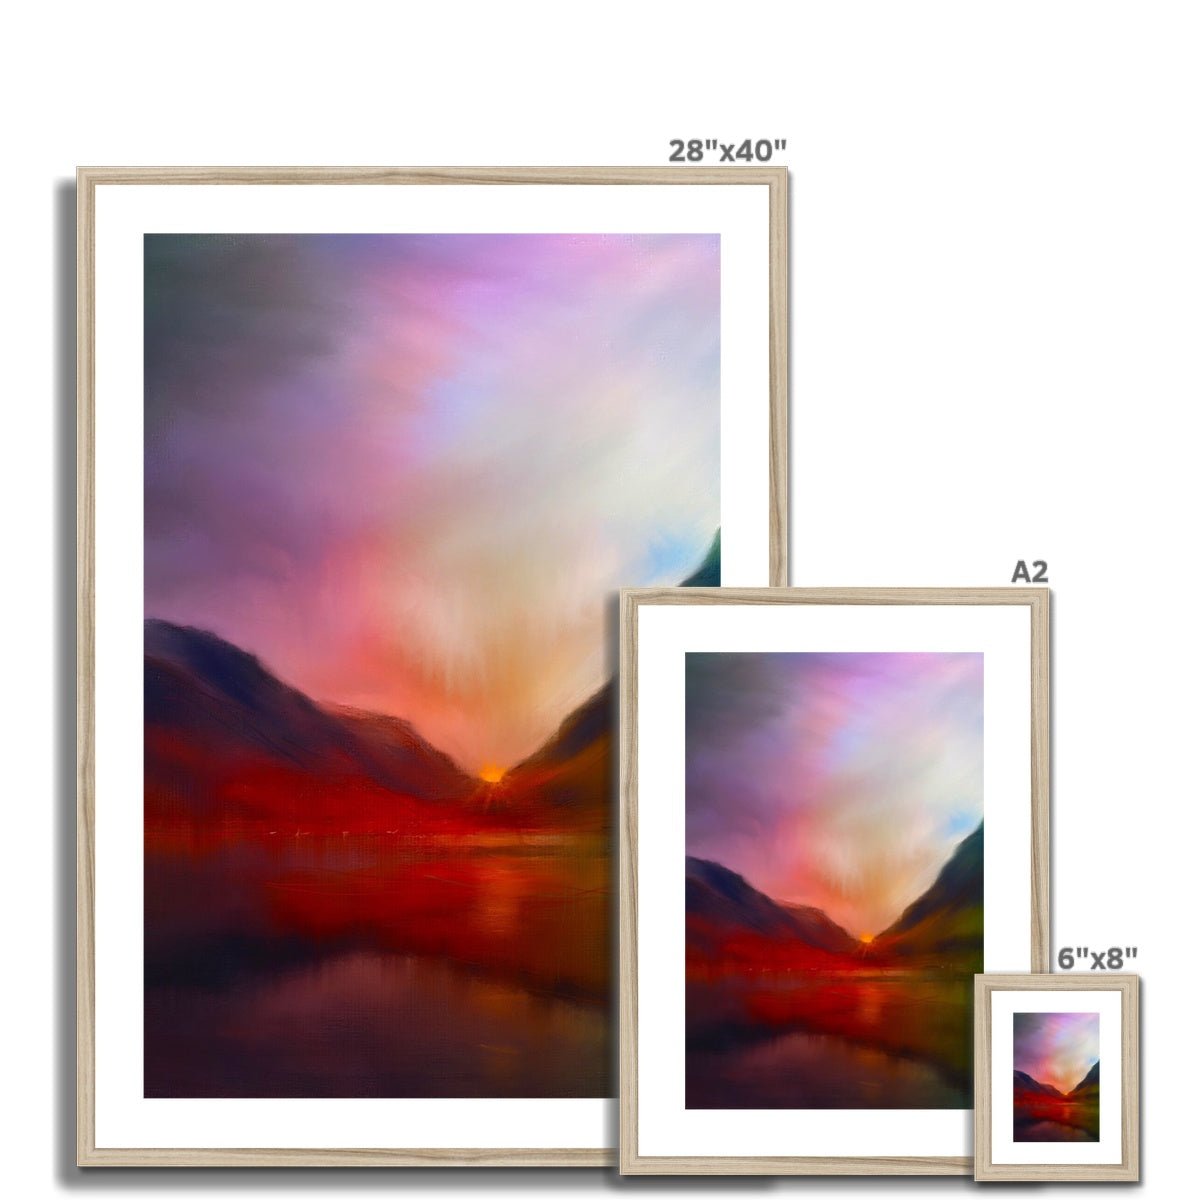 Glencoe Sunset Painting | Framed & Mounted Prints From Scotland-Framed & Mounted Prints-Glencoe Art Gallery-Paintings, Prints, Homeware, Art Gifts From Scotland By Scottish Artist Kevin Hunter